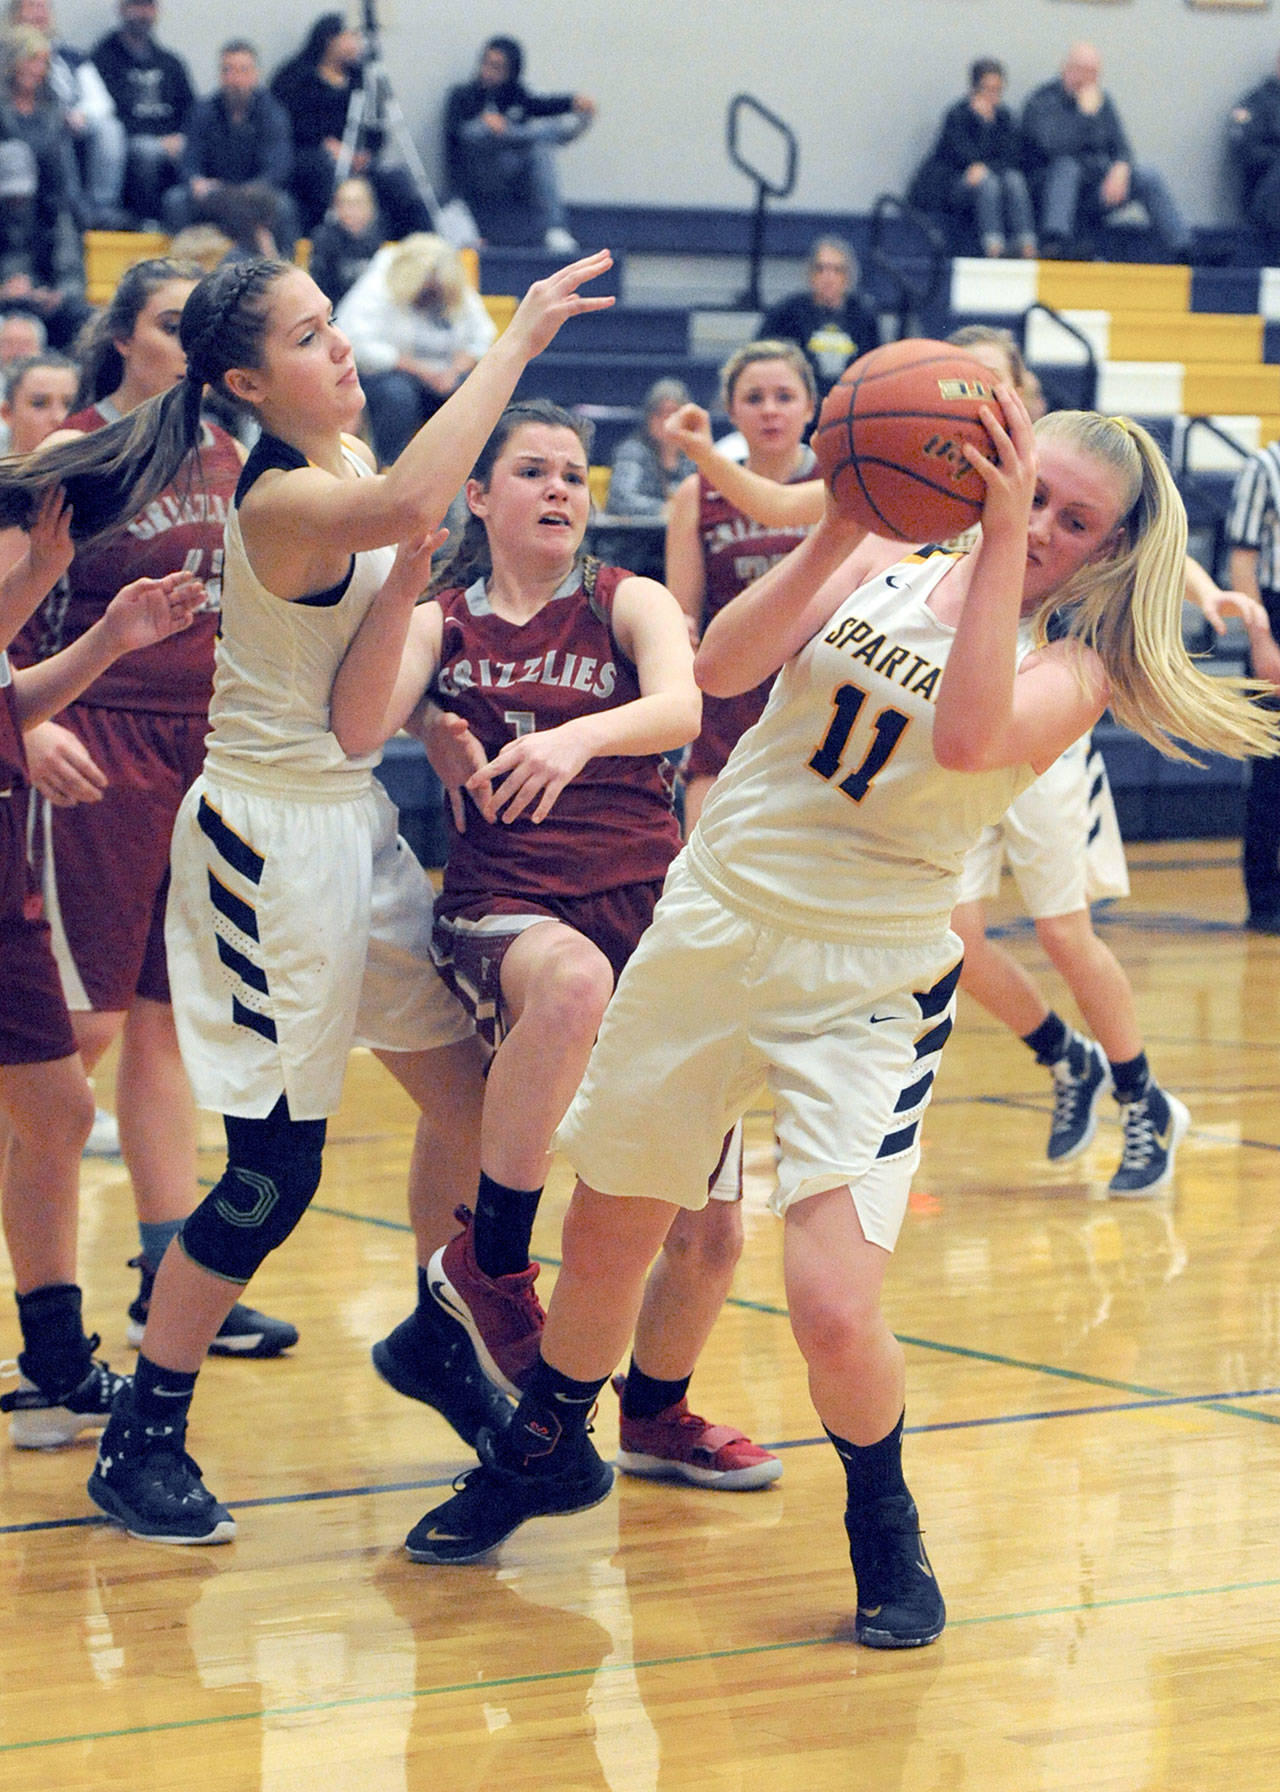 Lonnie Archibald/for Peninsula Daily News Forks’ Kesia Rowley, right, grabs the ball while defended by Hoquiam’s Jade Cox, center. Also in on the action is Forks’ Kray Horton, left.